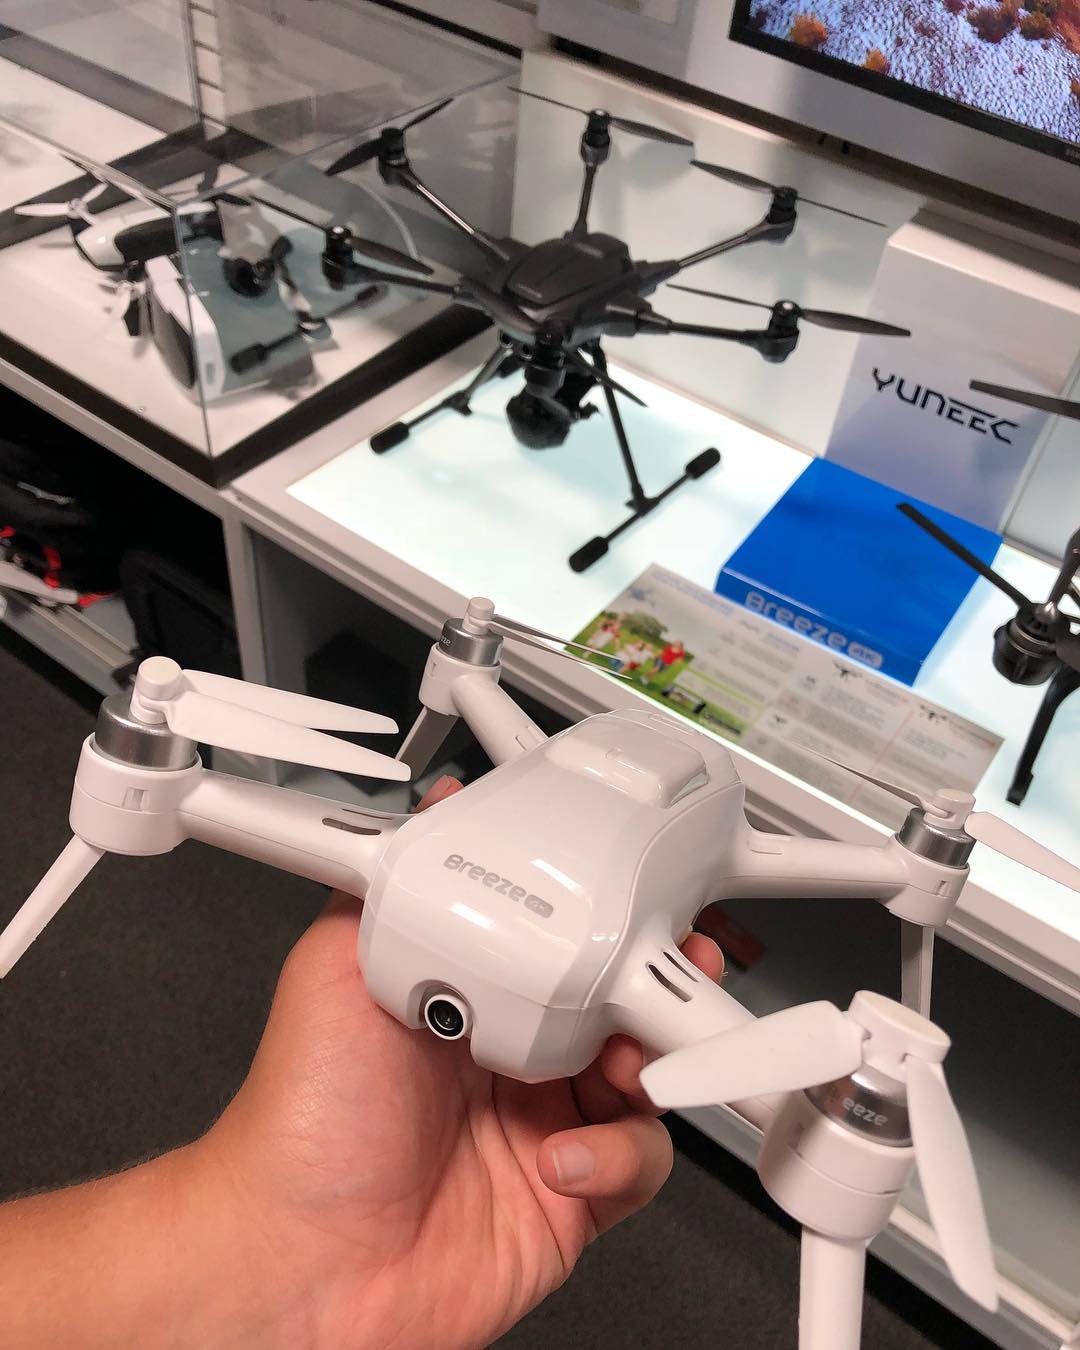 Drone at Best Buy Orlando